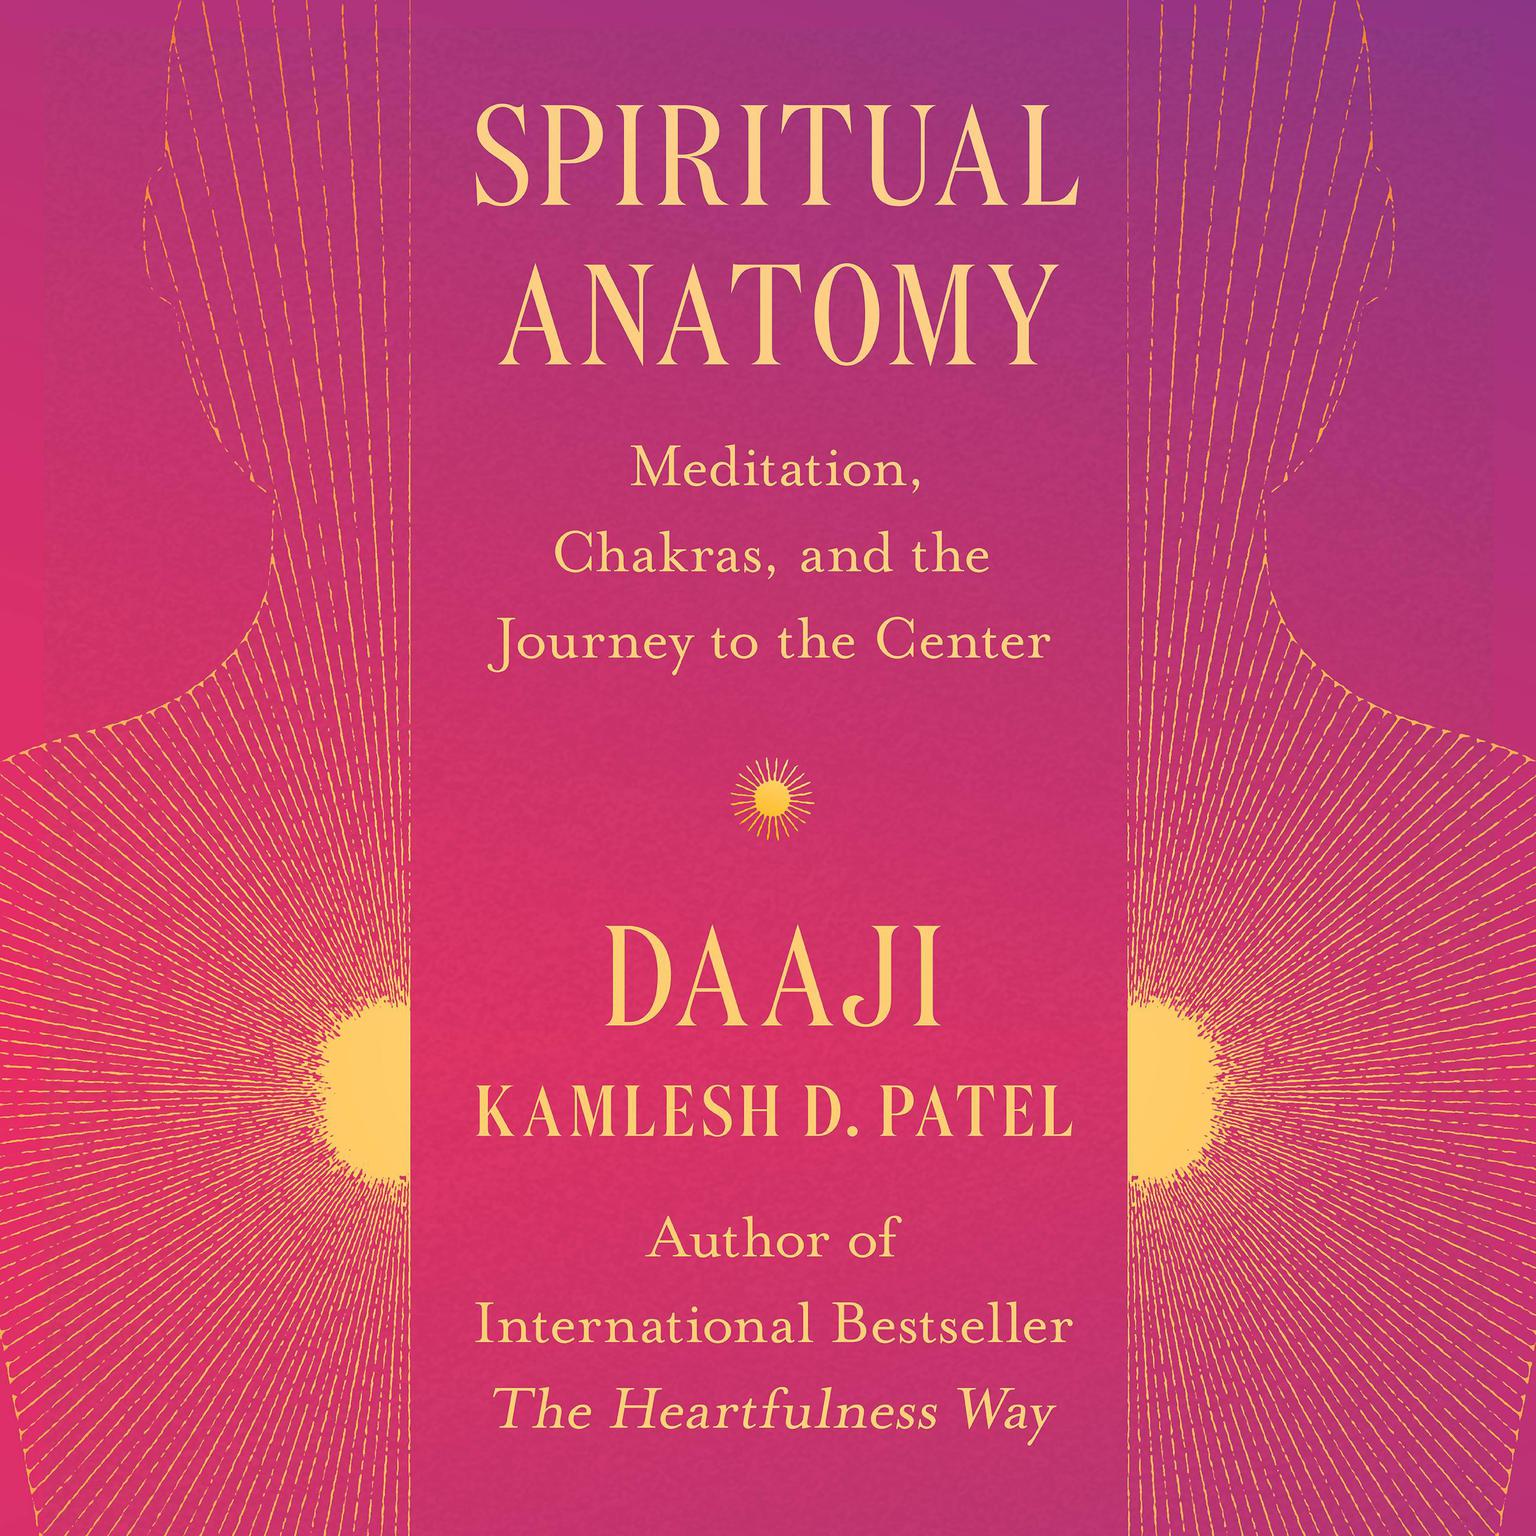 Spiritual Anatomy: Meditation, Chakras, and the Journey to the Center Audiobook, by Kamlesh D. Patel